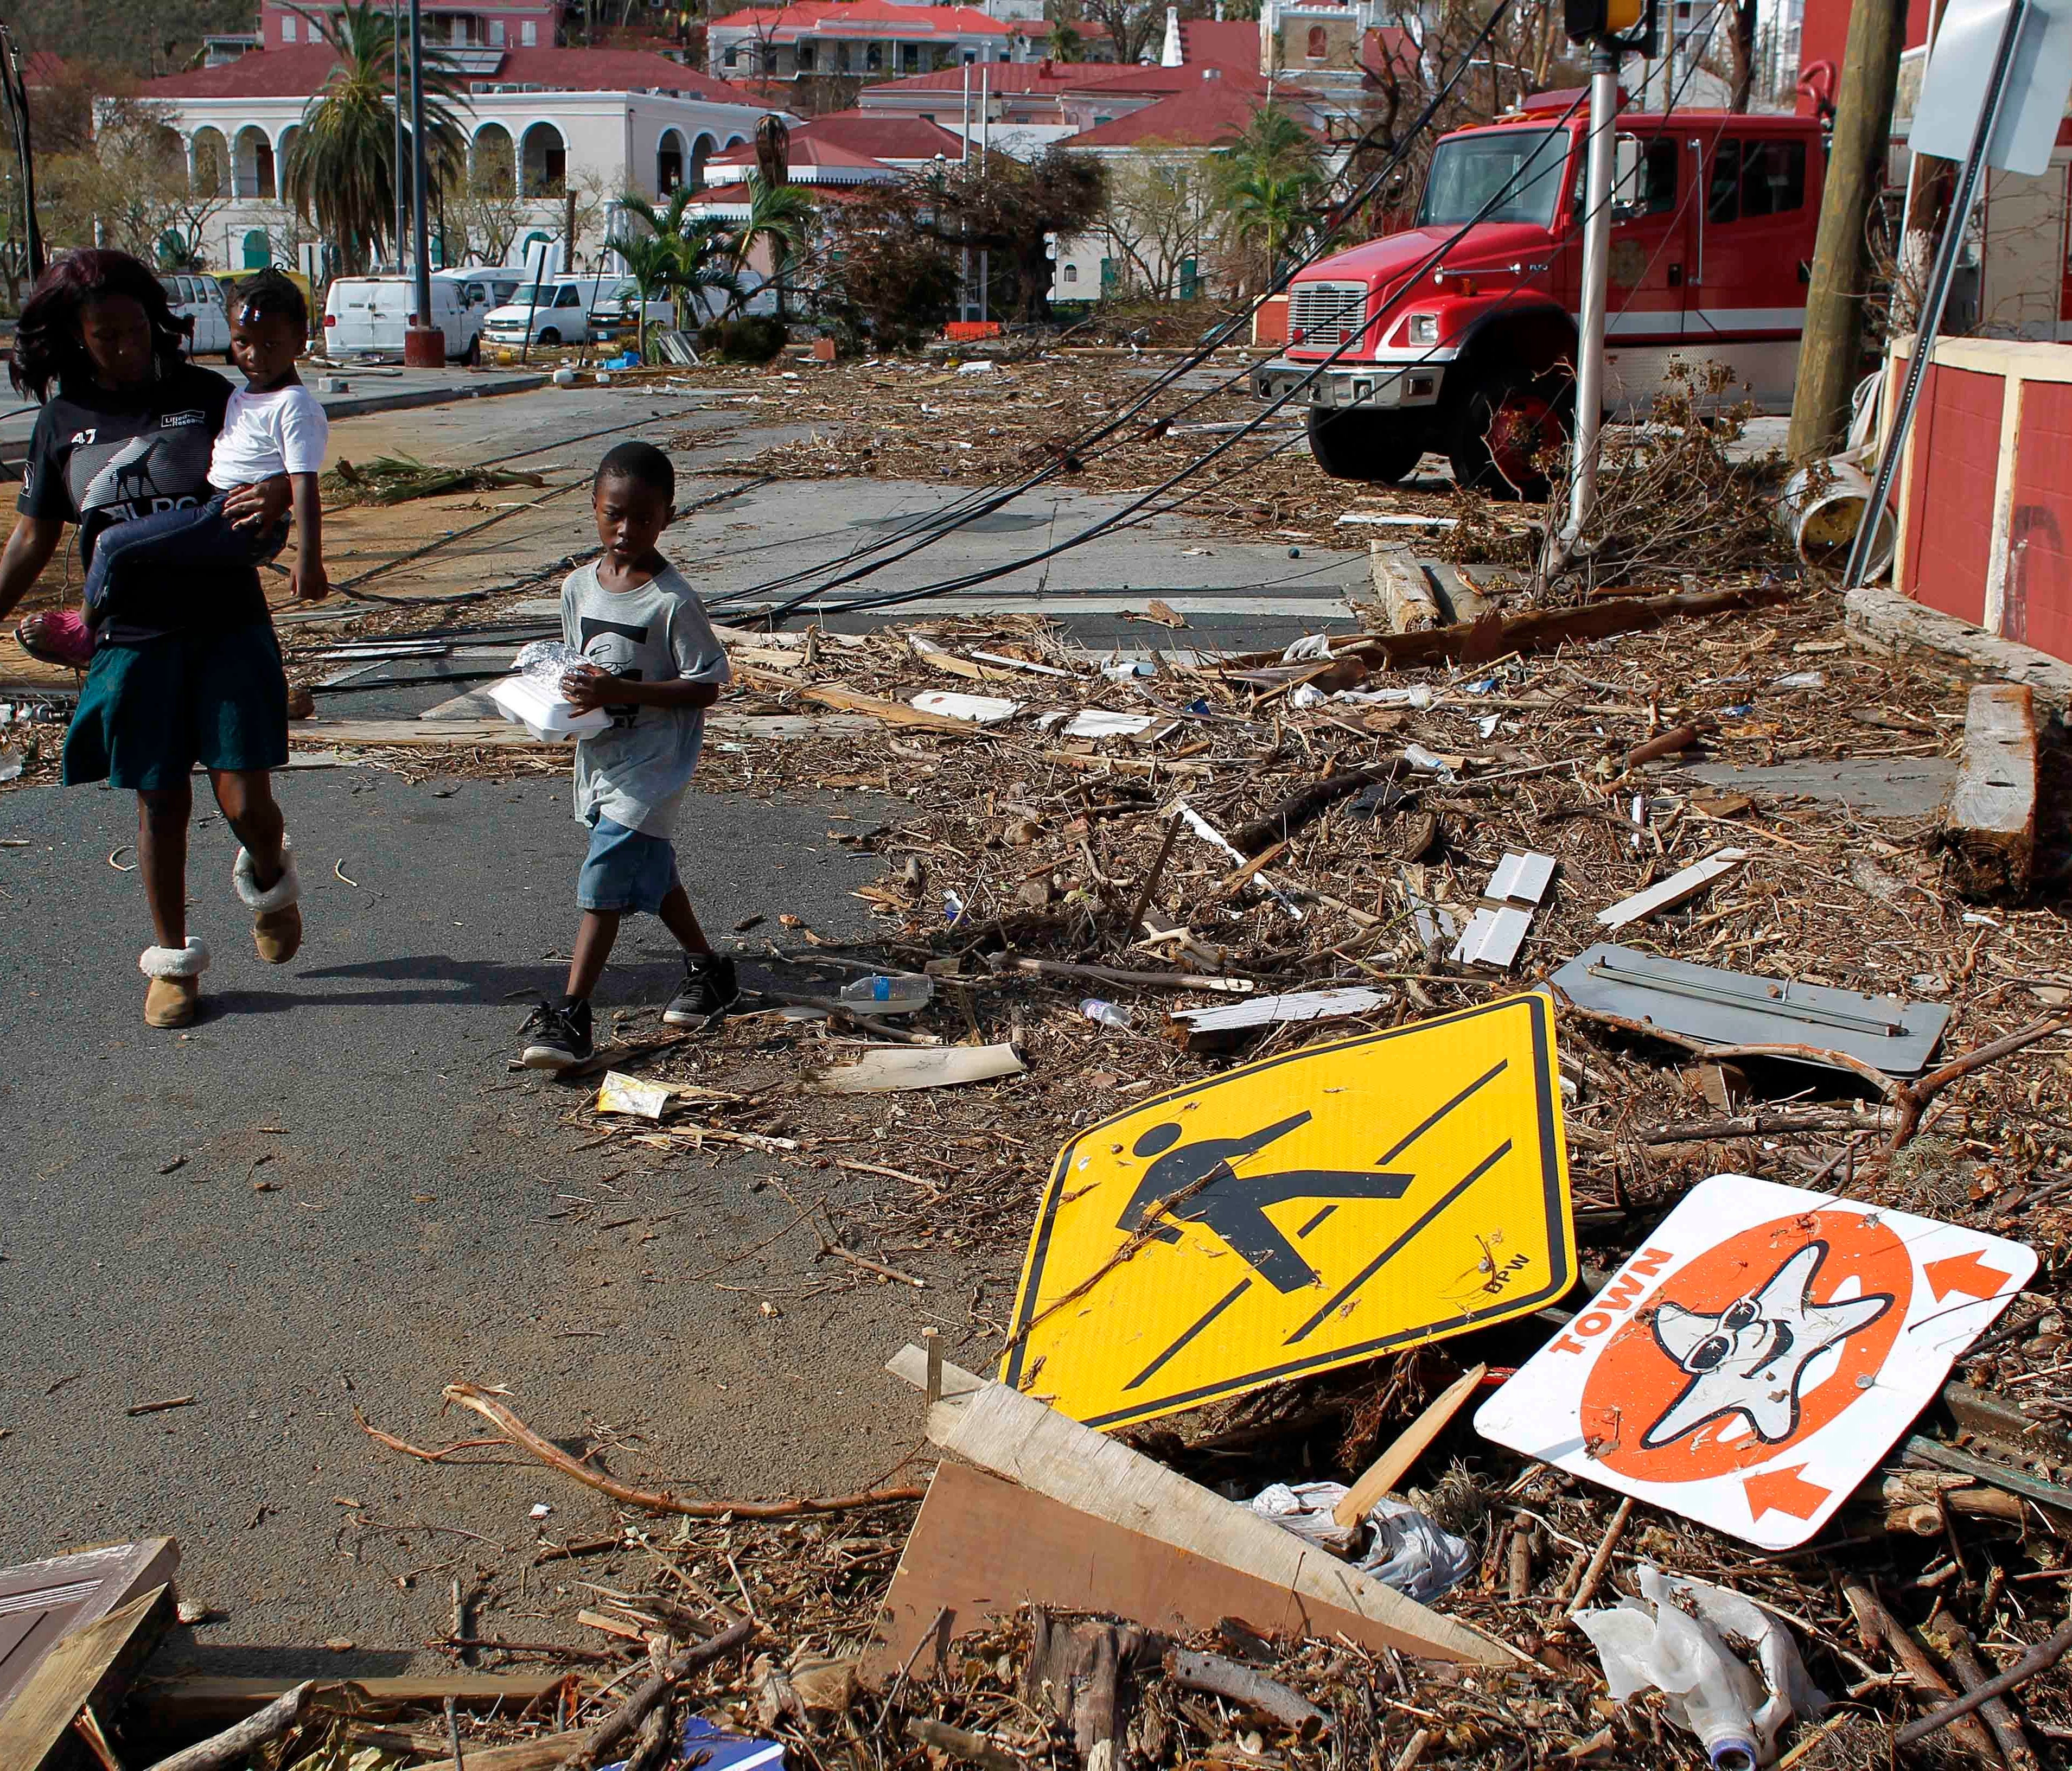 A woman with her two children walk past debris left by Hurricane Irma in Charlotte Amalie, St. Thomas, U.S. Virgin Islands, on Sept. 10, 2017.